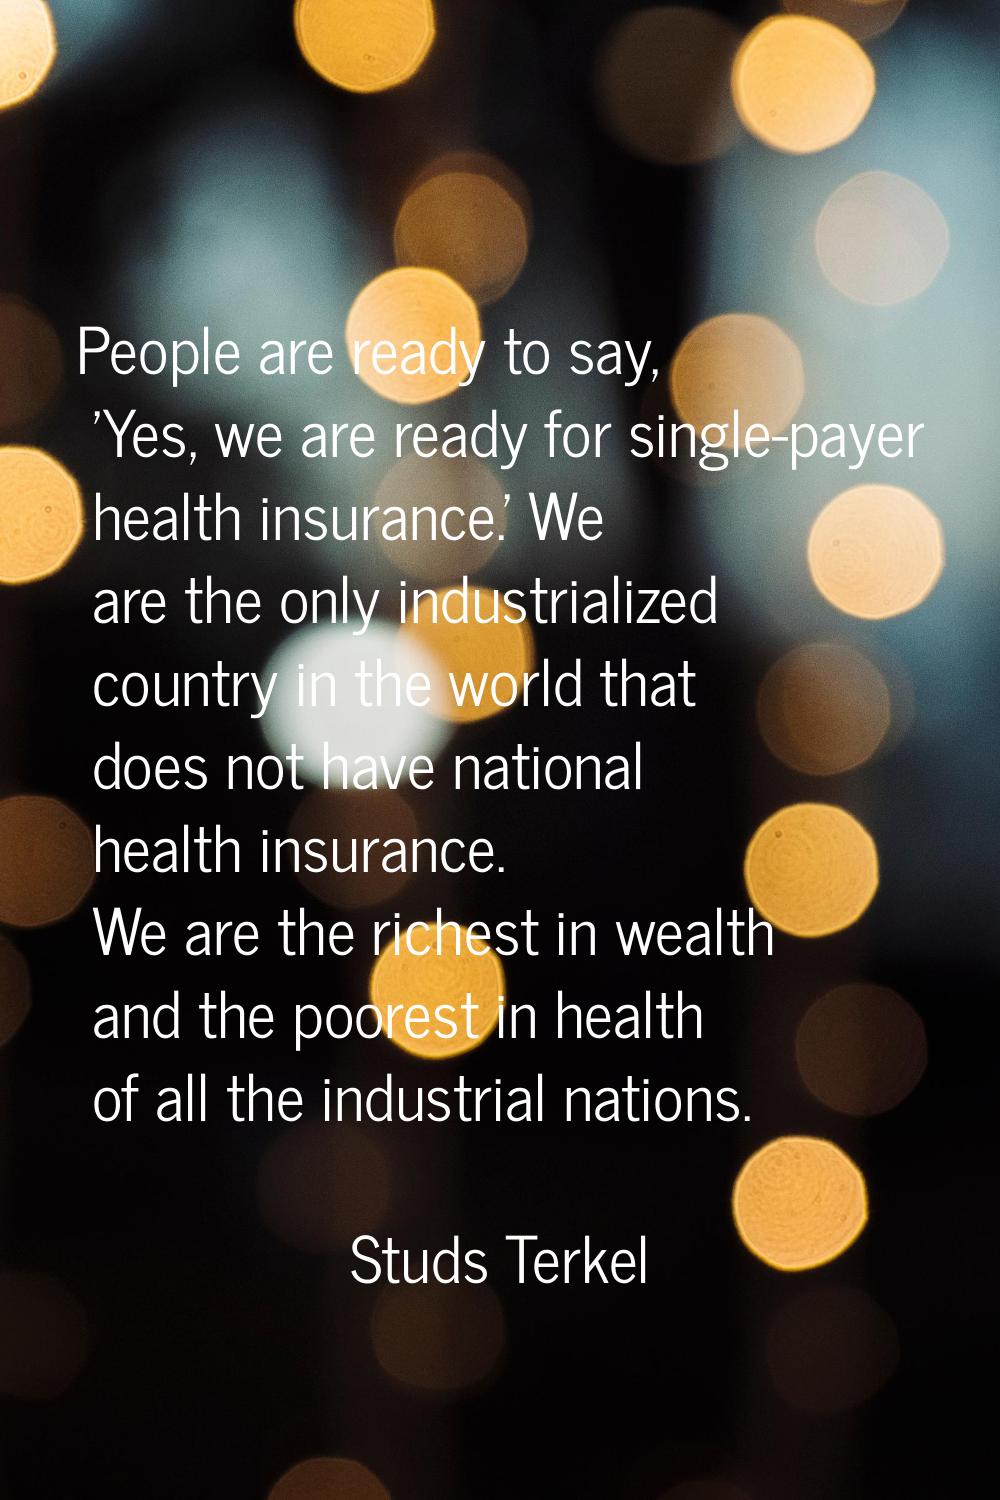 People are ready to say, 'Yes, we are ready for single-payer health insurance.' We are the only ind